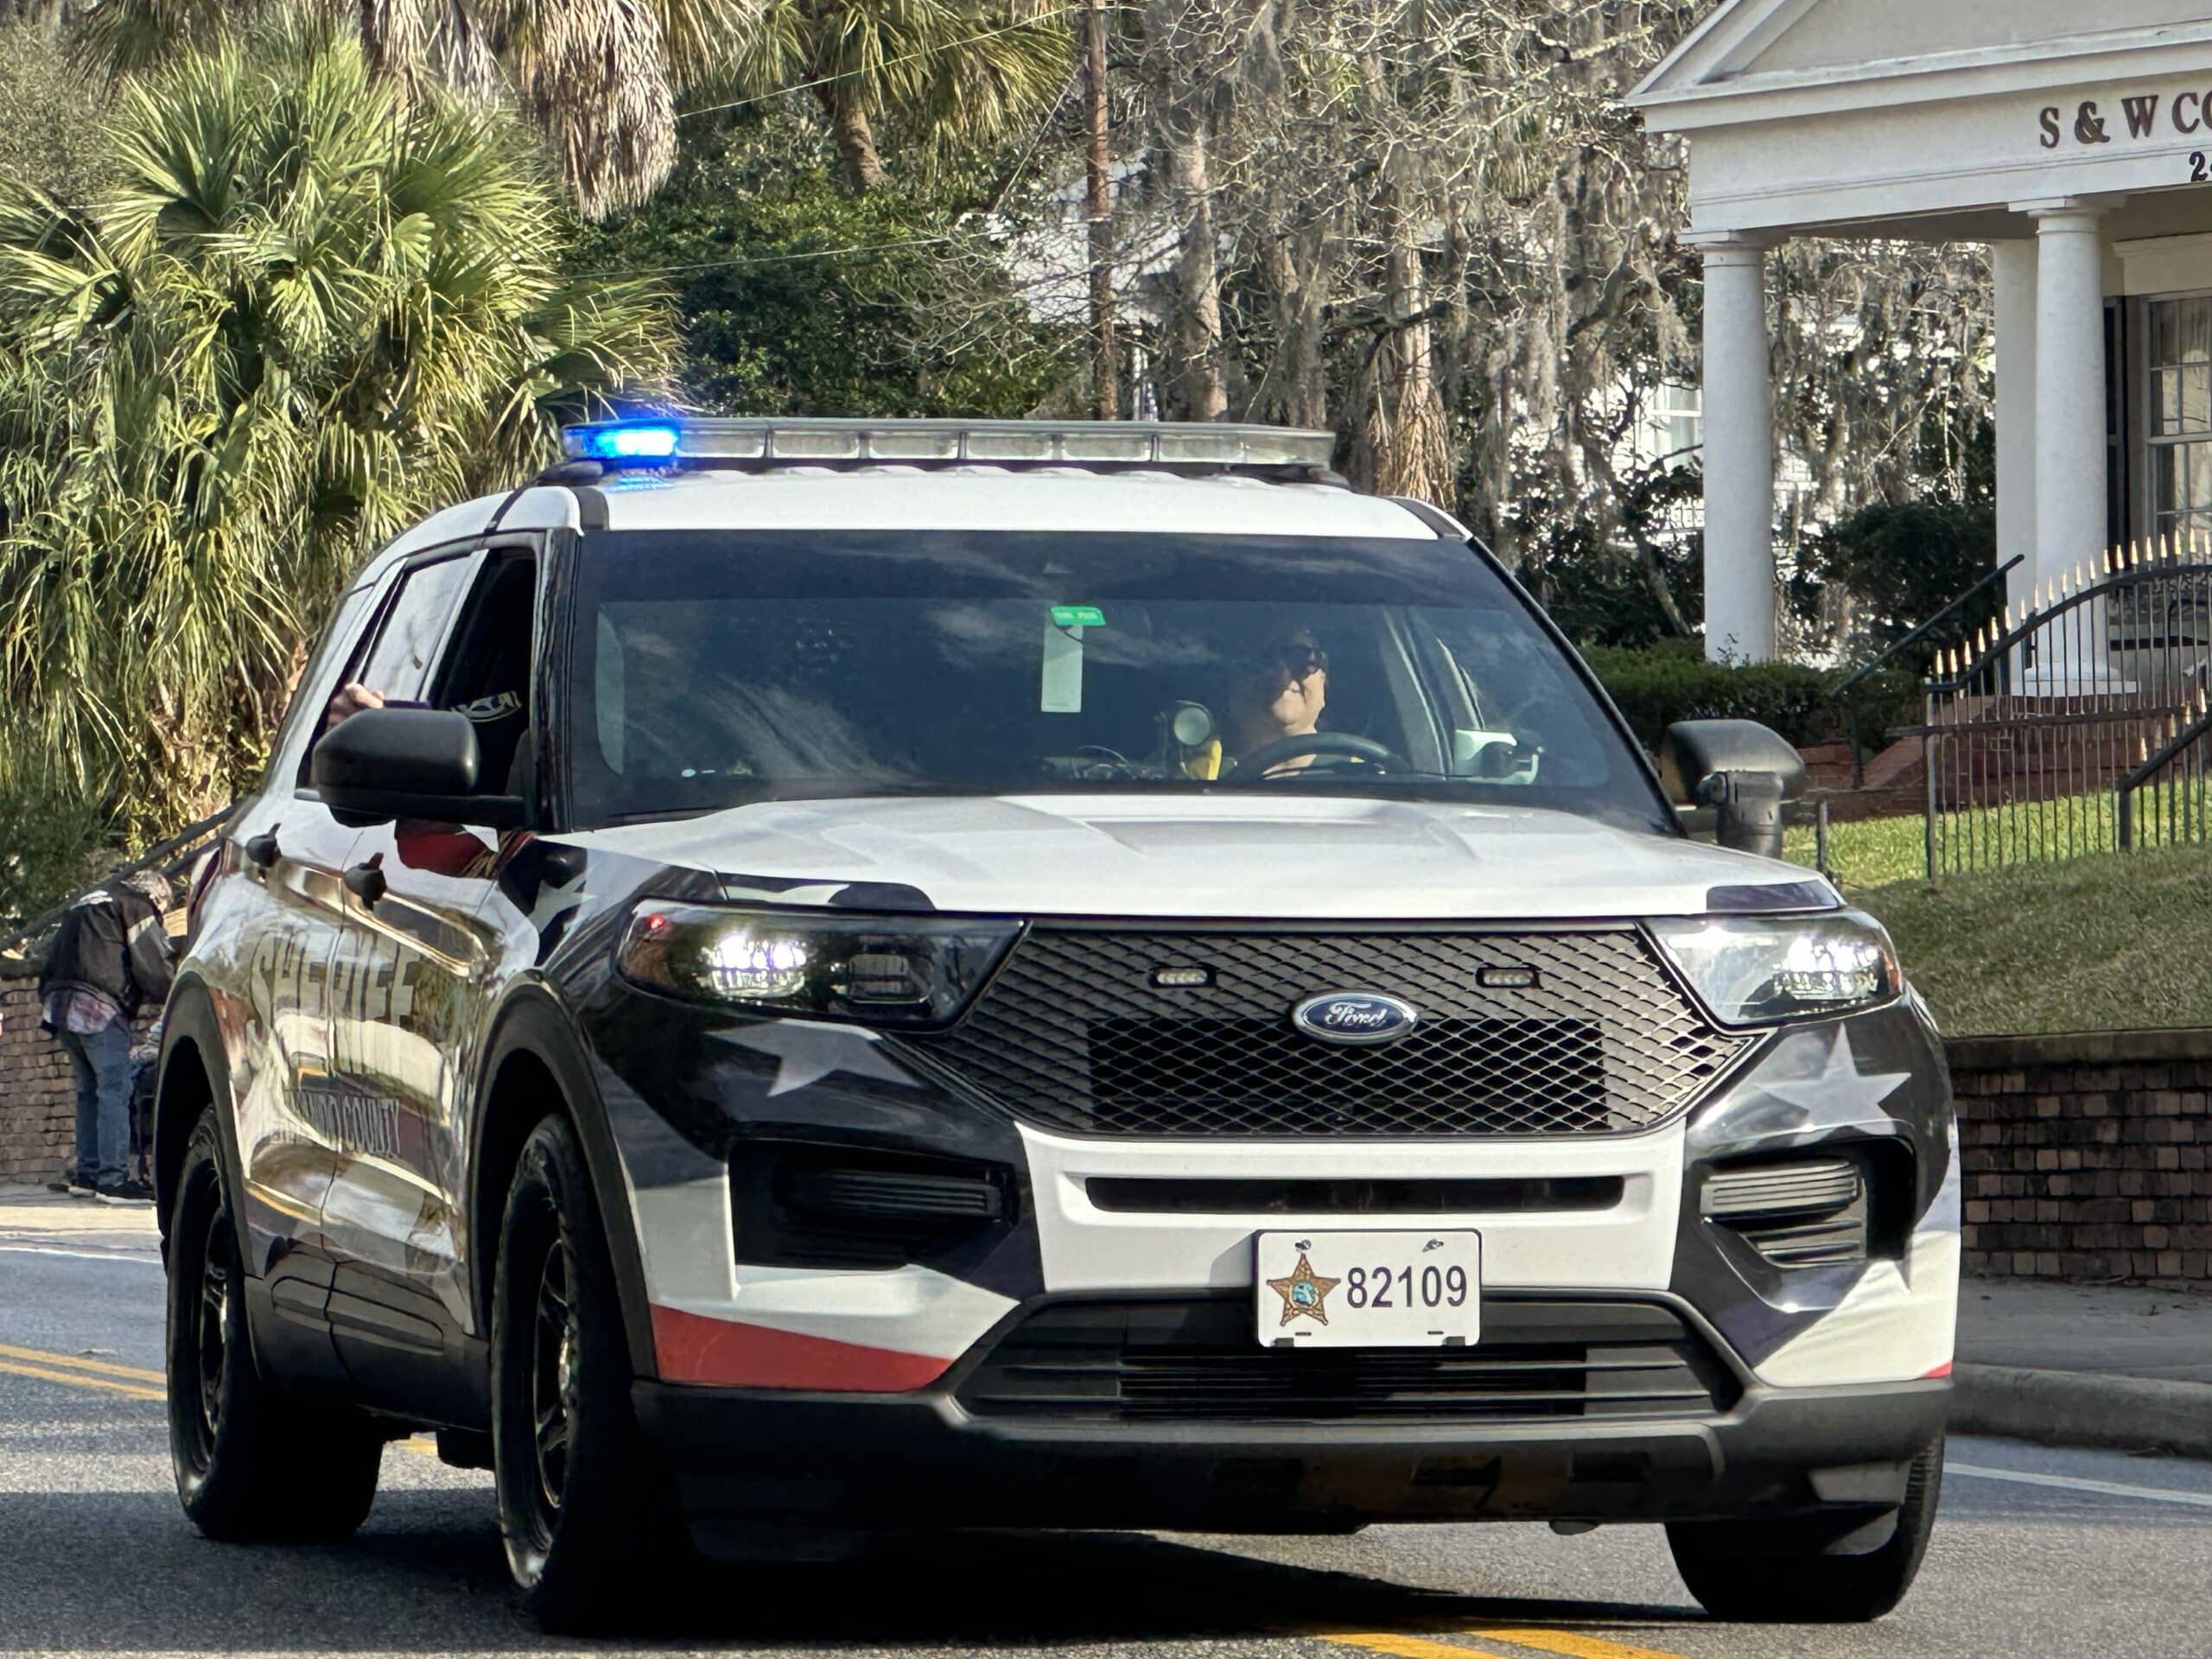 Hernando County Sheriff's Office at the Dr. Martin Luther King Jr. Day Parade. [Photo by Summer Hampton]